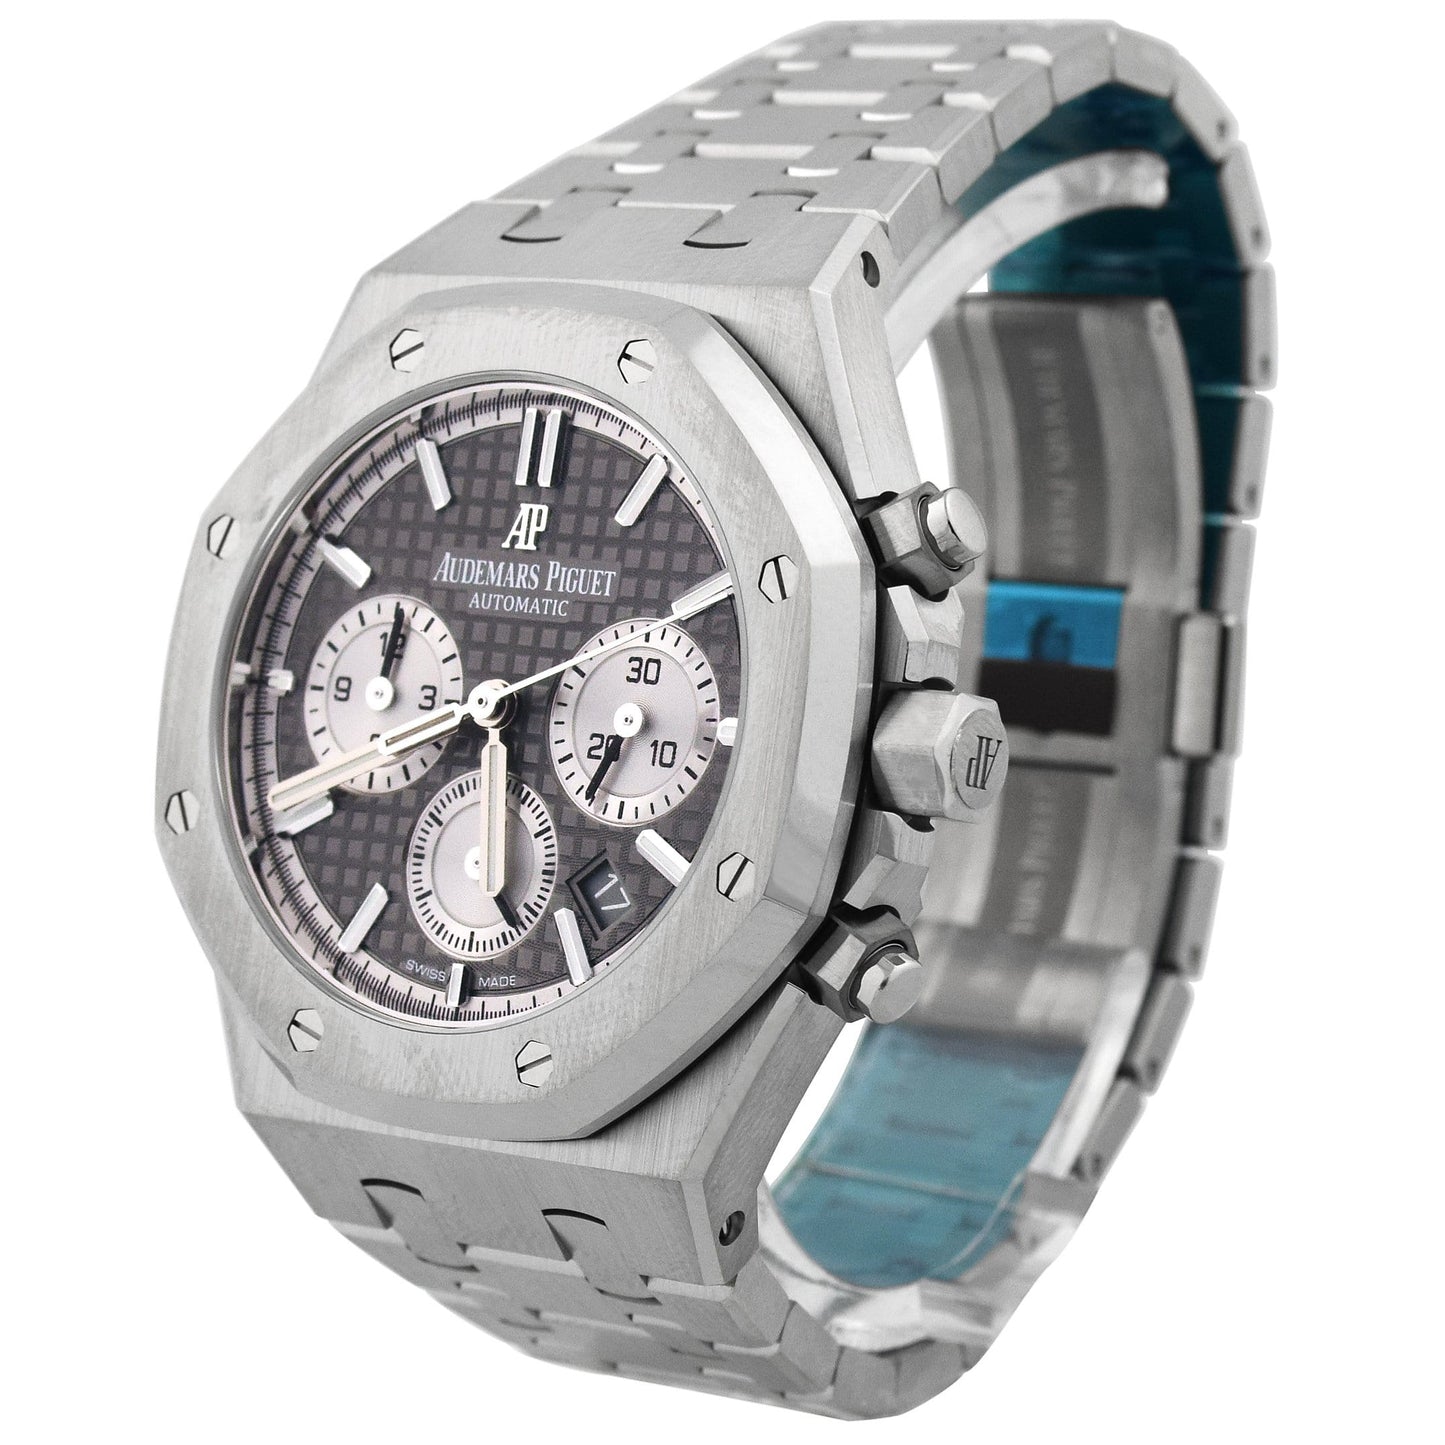 Audemars Piguet Royal Oak Stainless Steel 38mm Silver Chronograph Dial Watch Reference#:  26315ST.OO.1256ST.02 - Happy Jewelers Fine Jewelry Lifetime Warranty